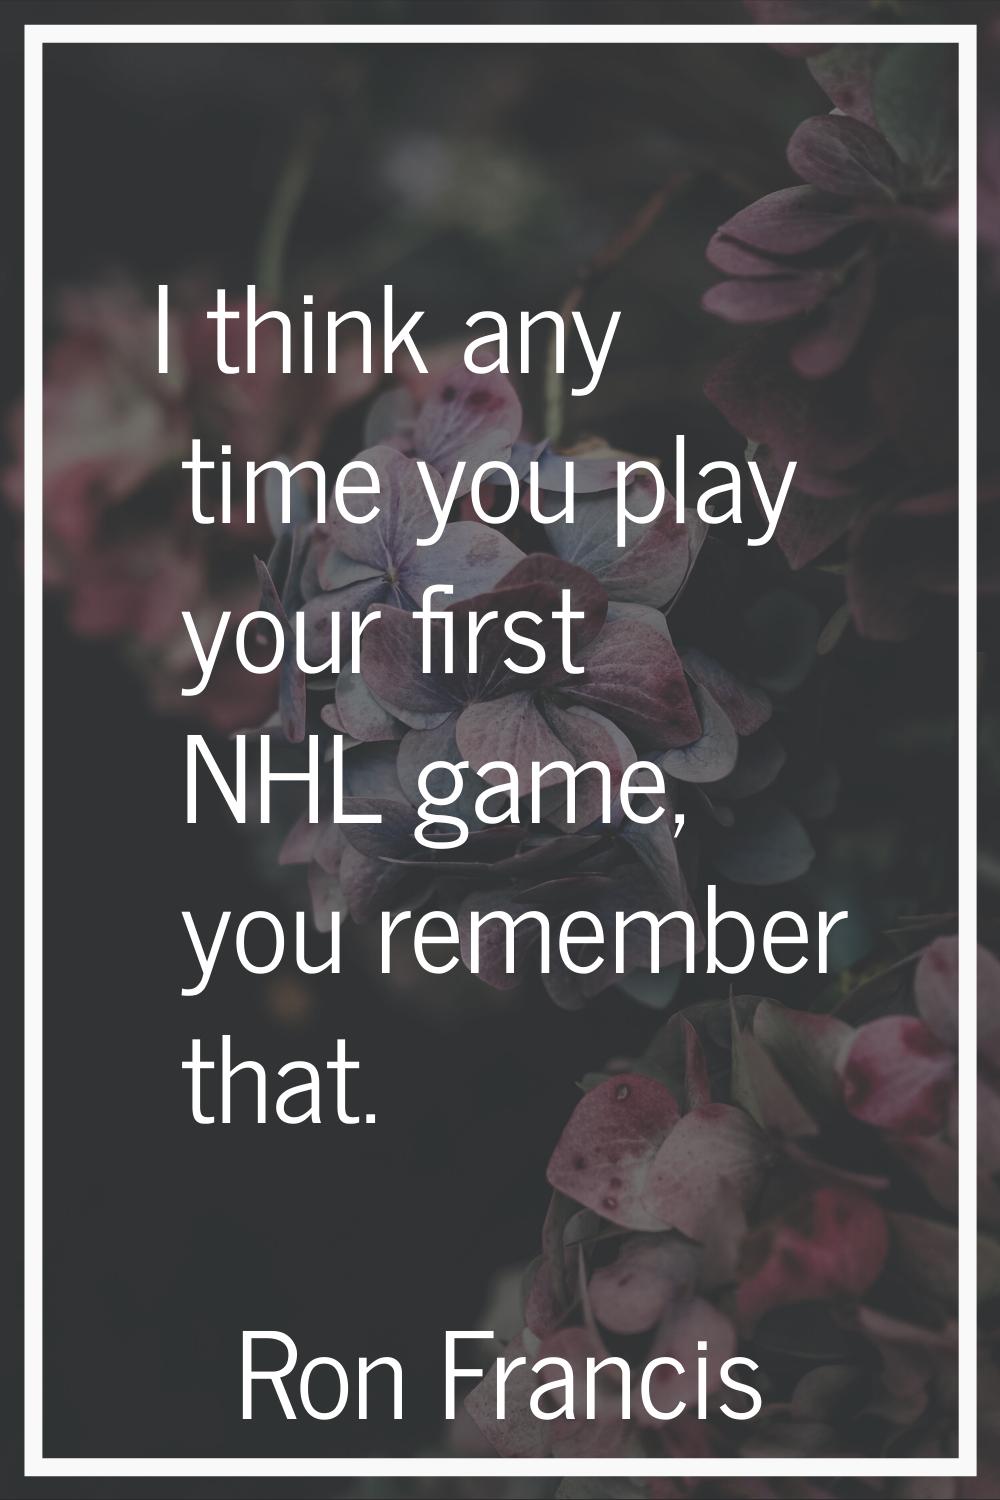 I think any time you play your first NHL game, you remember that.